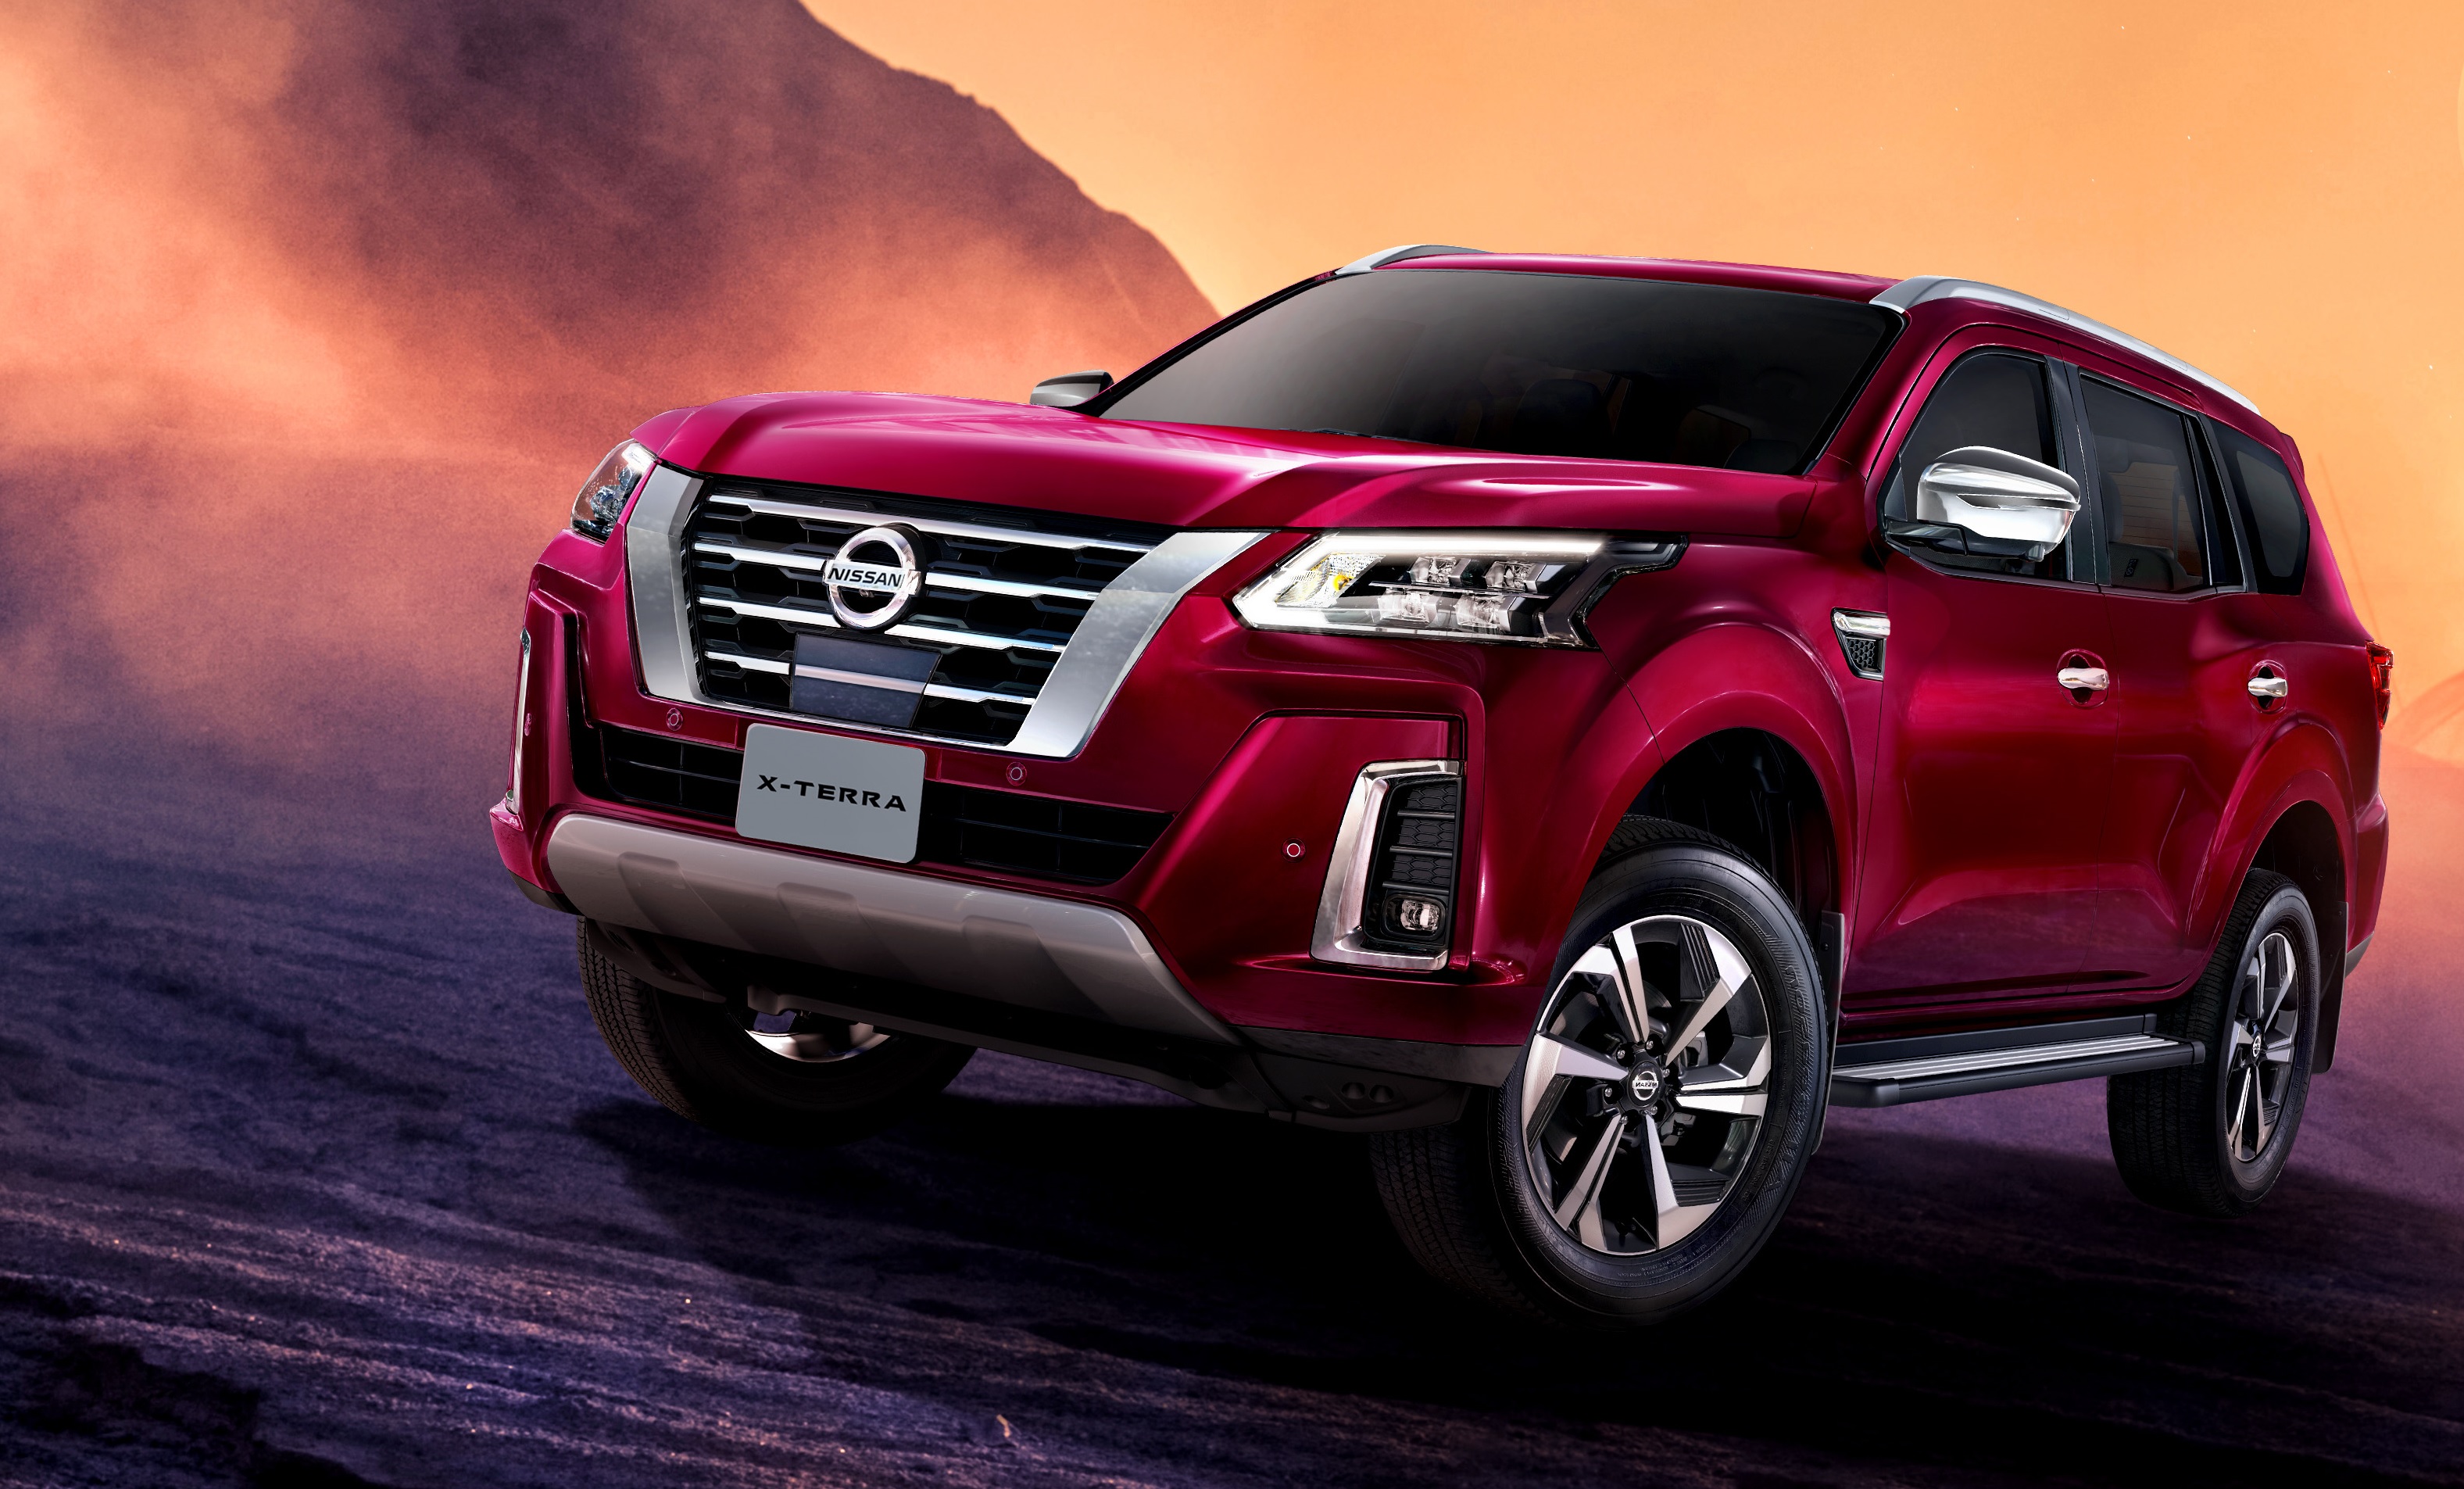 All-New Nissan X-Terra expands SUV lineup in Middle East